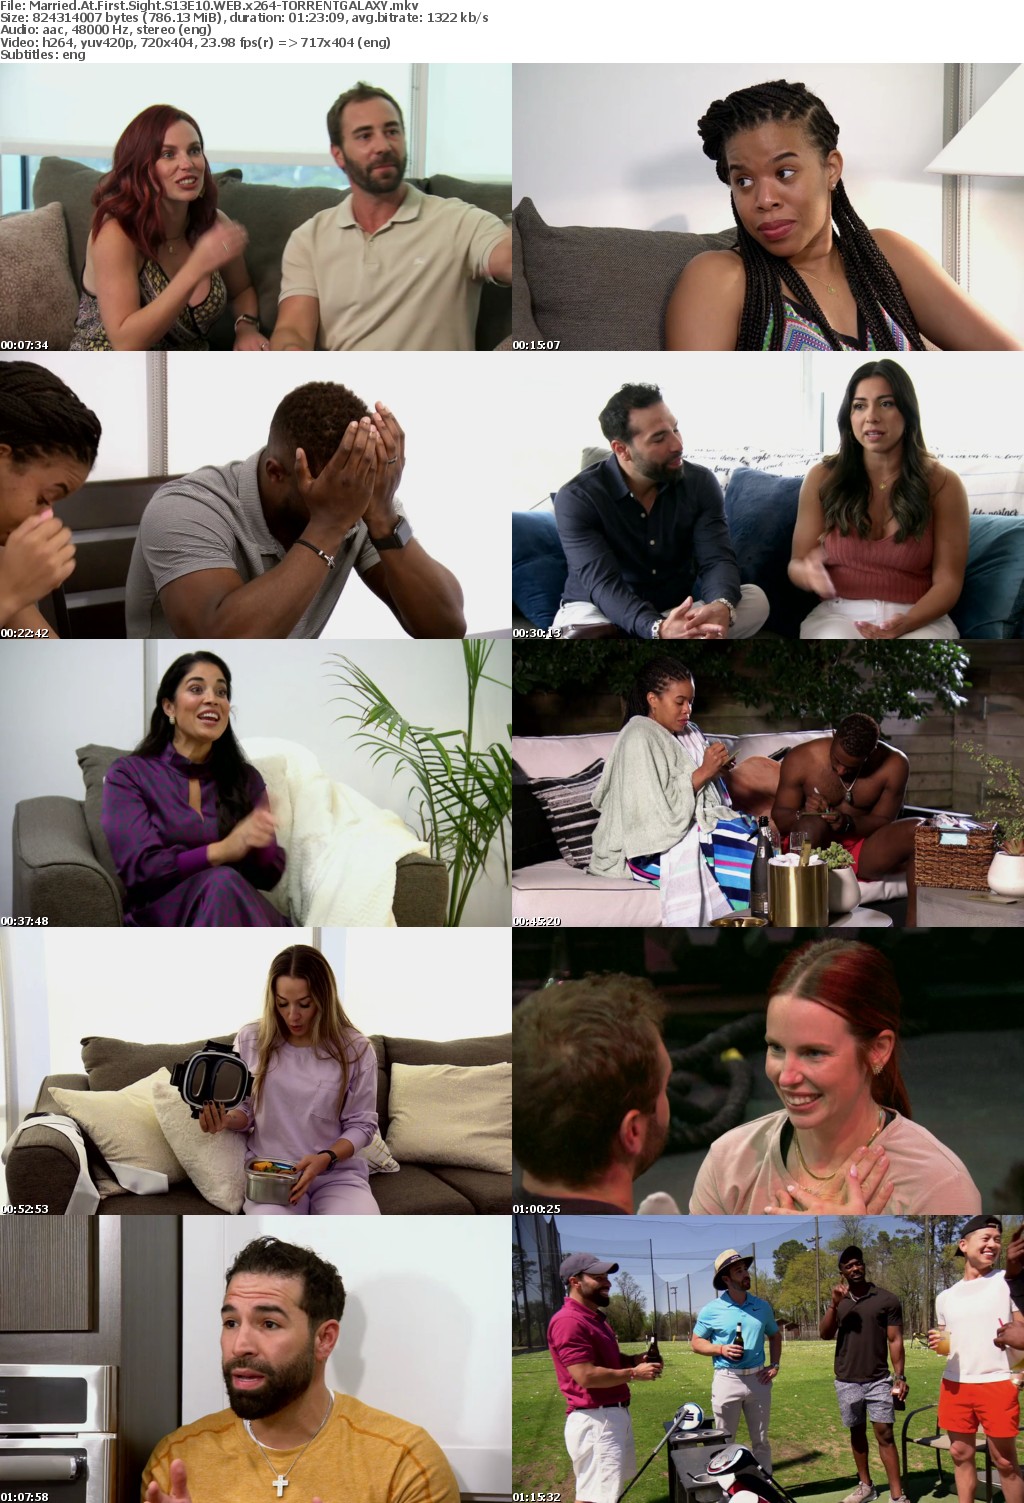 Married At First Sight S13E10 WEB x264-GALAXY